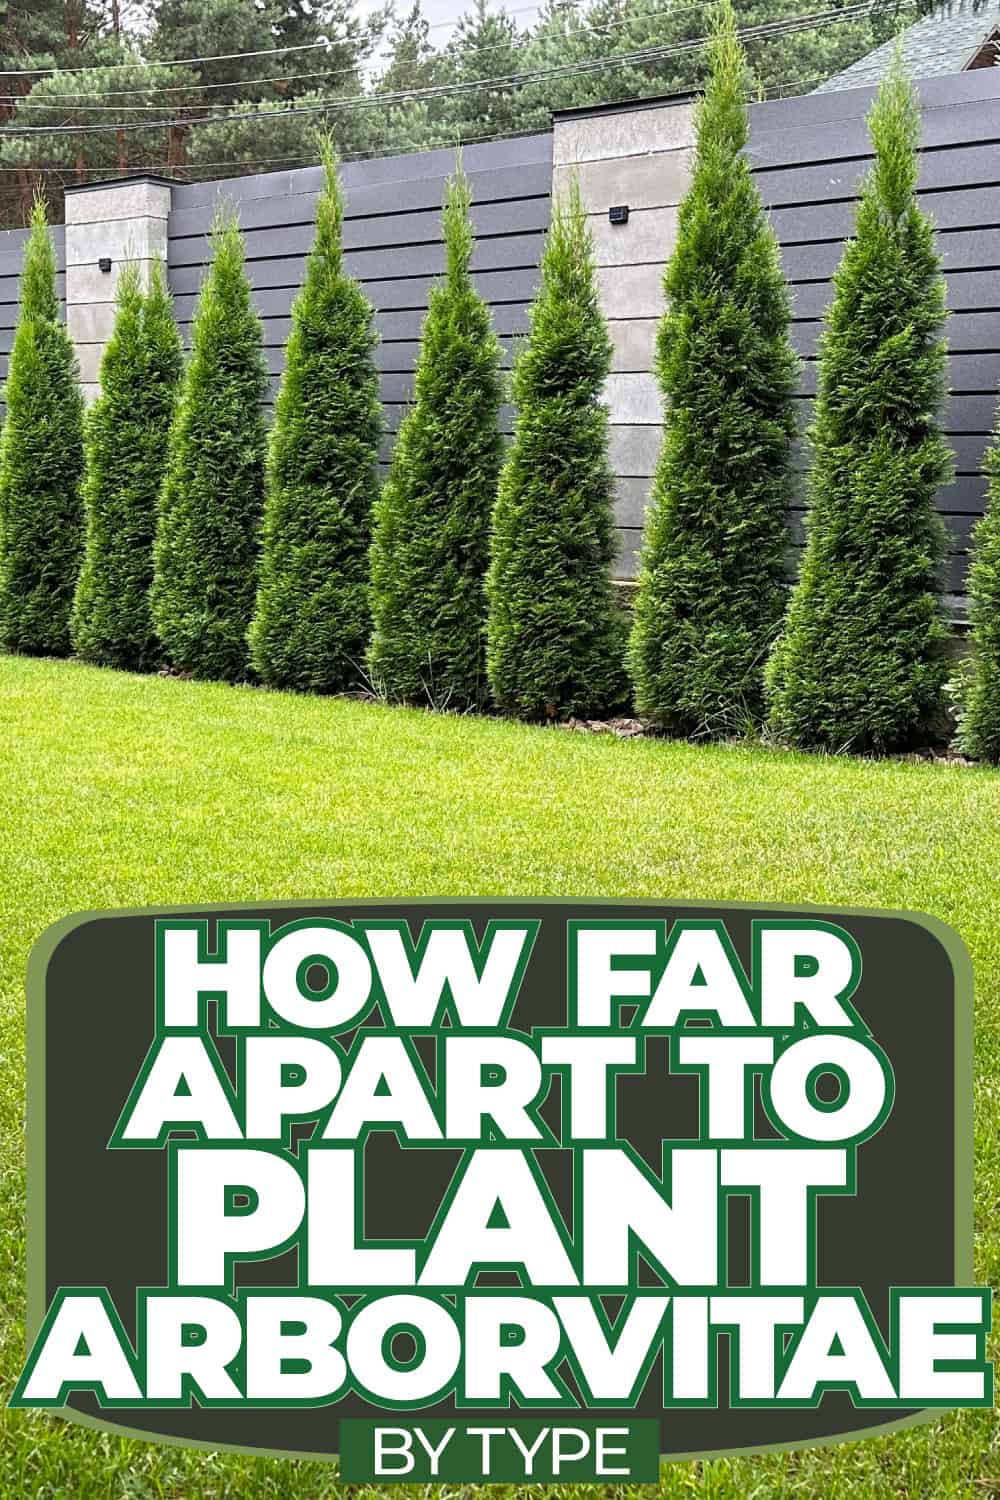 How Far Apart To Plant Arborvitae [By Type]